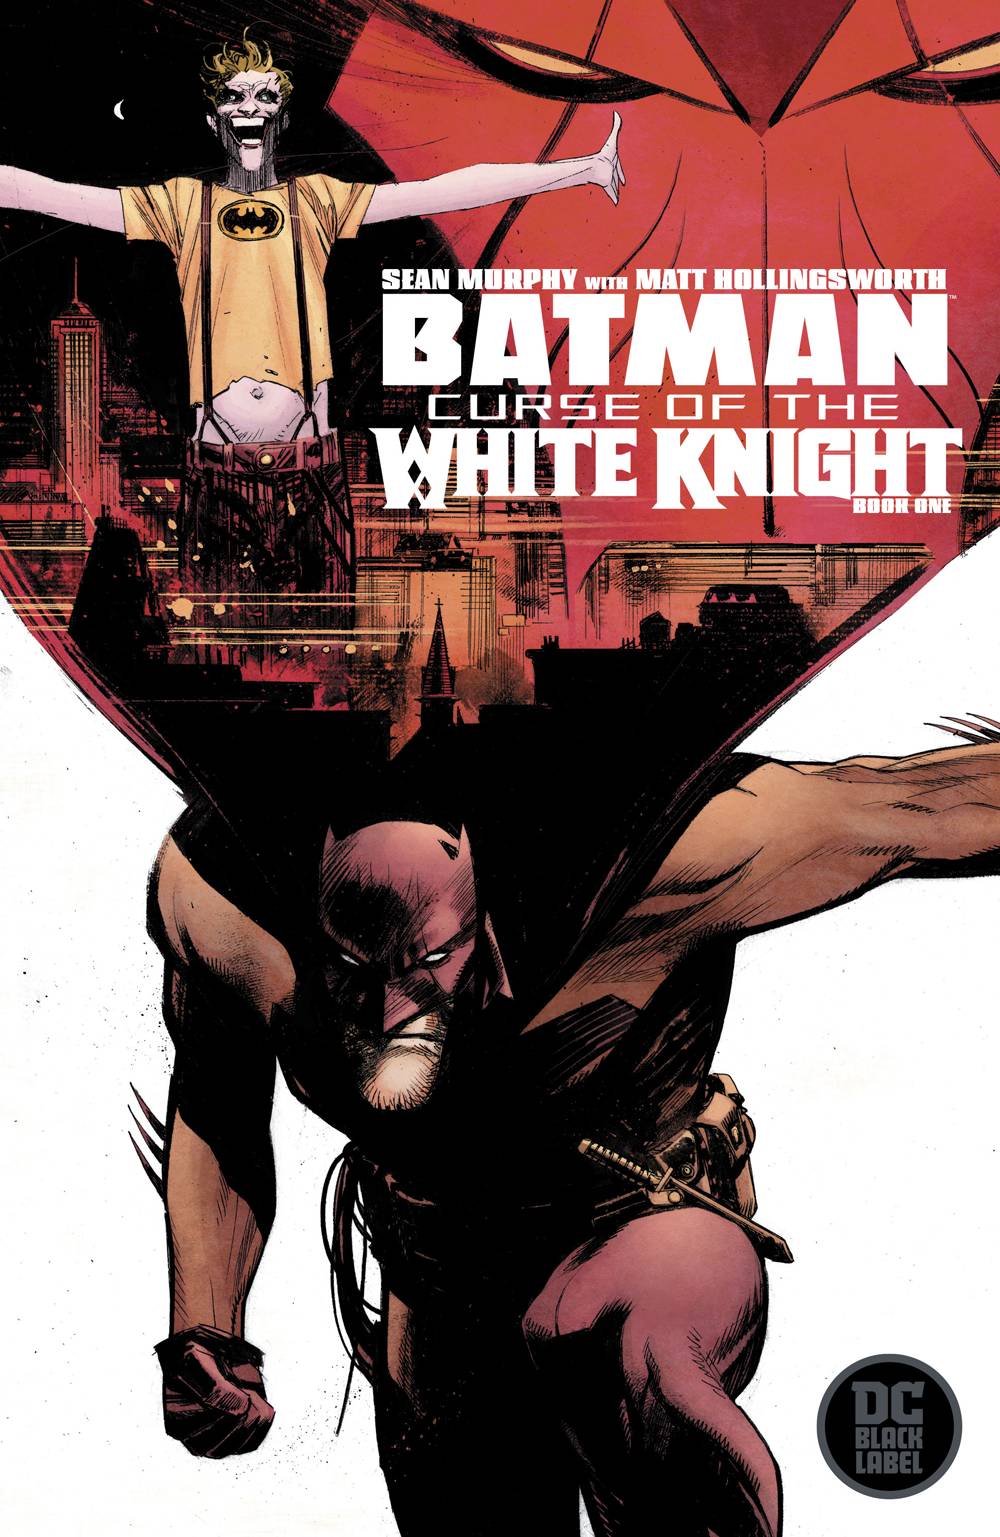 BATMAN CURSE OF THE WHITE KNIGHT #1 (OF 8)